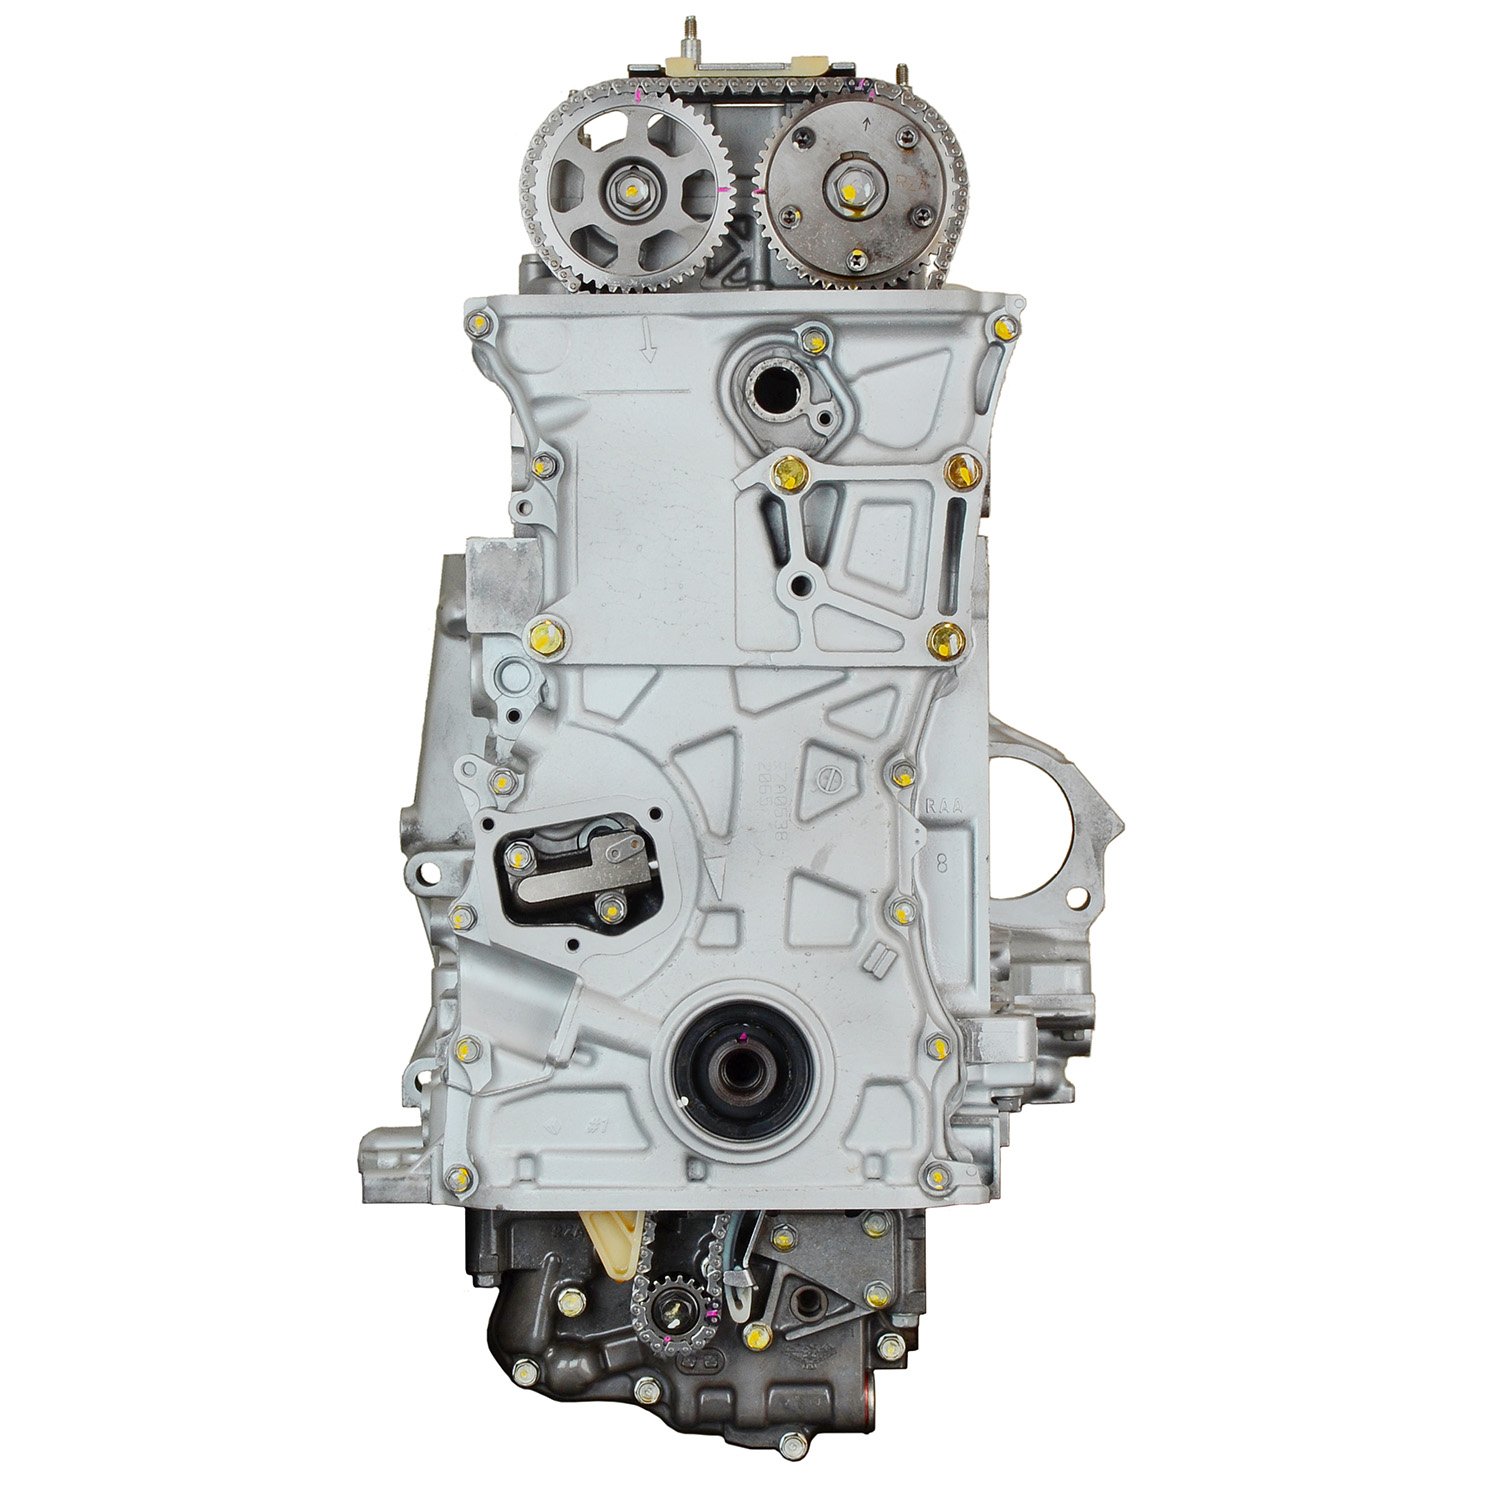 Remanufactured Crate Engine for 2007-2009 Honda CR-V with